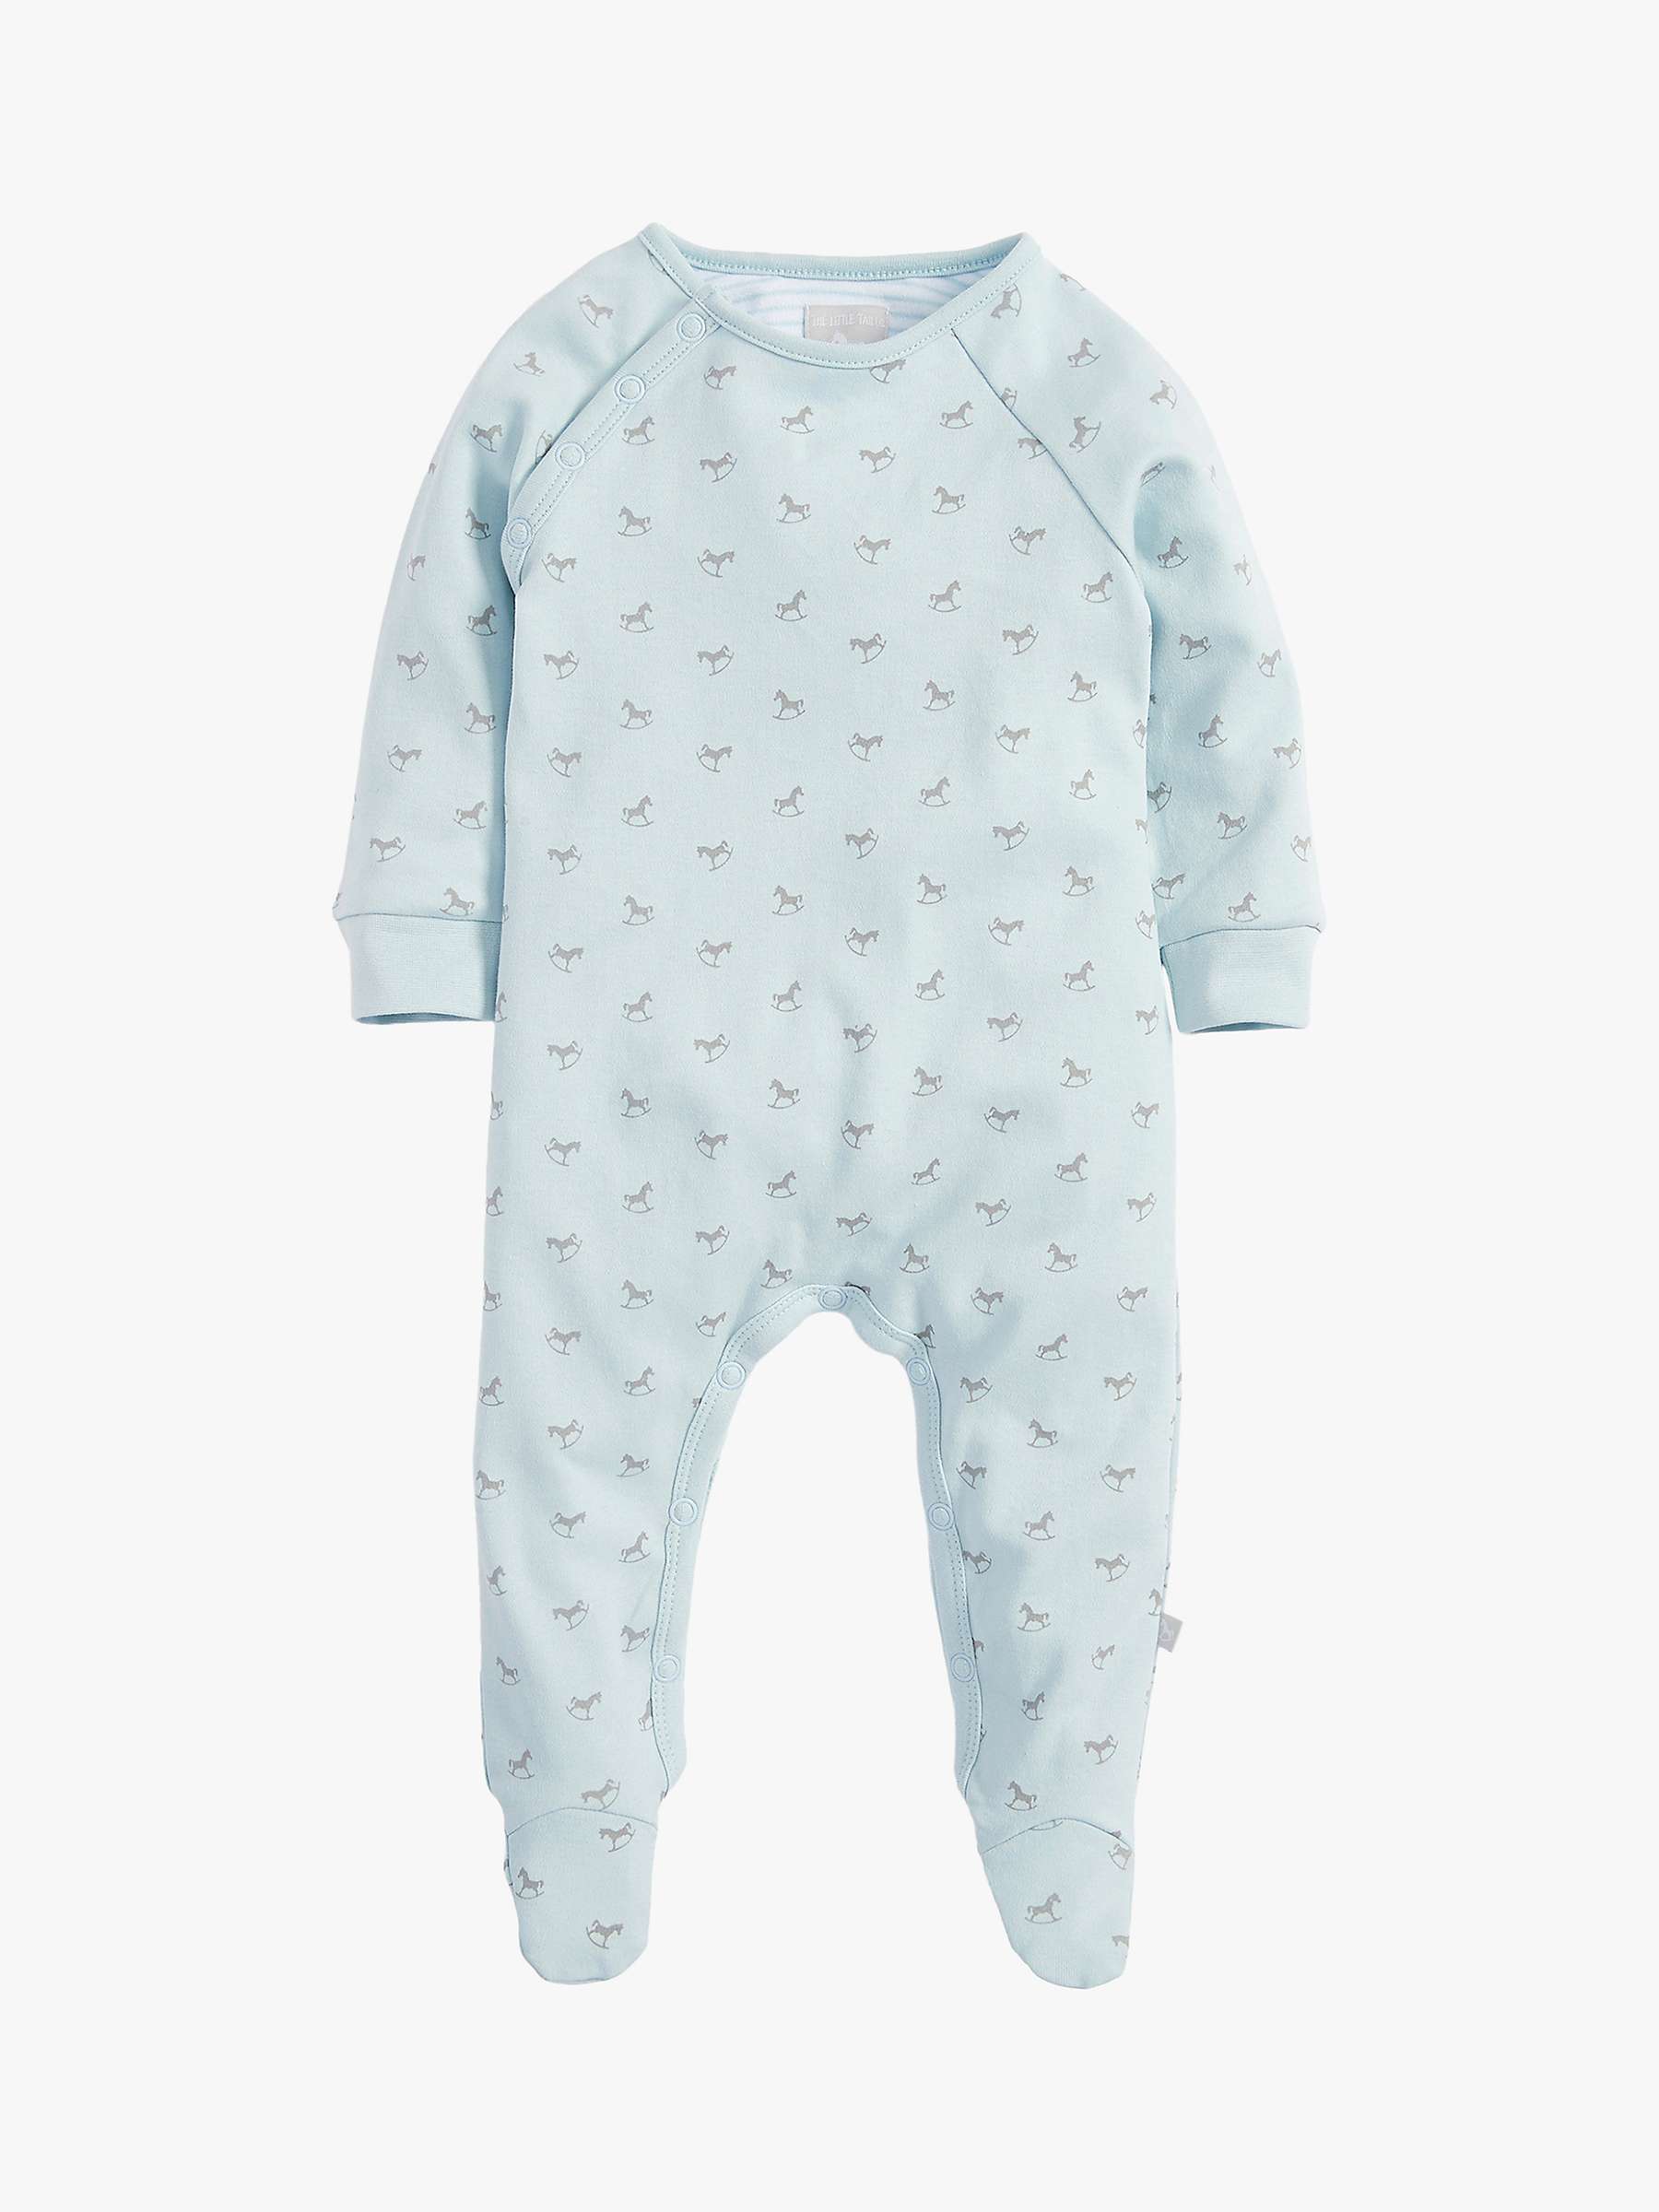 Buy The Little Tailor Baby Three Piece Set Online at johnlewis.com